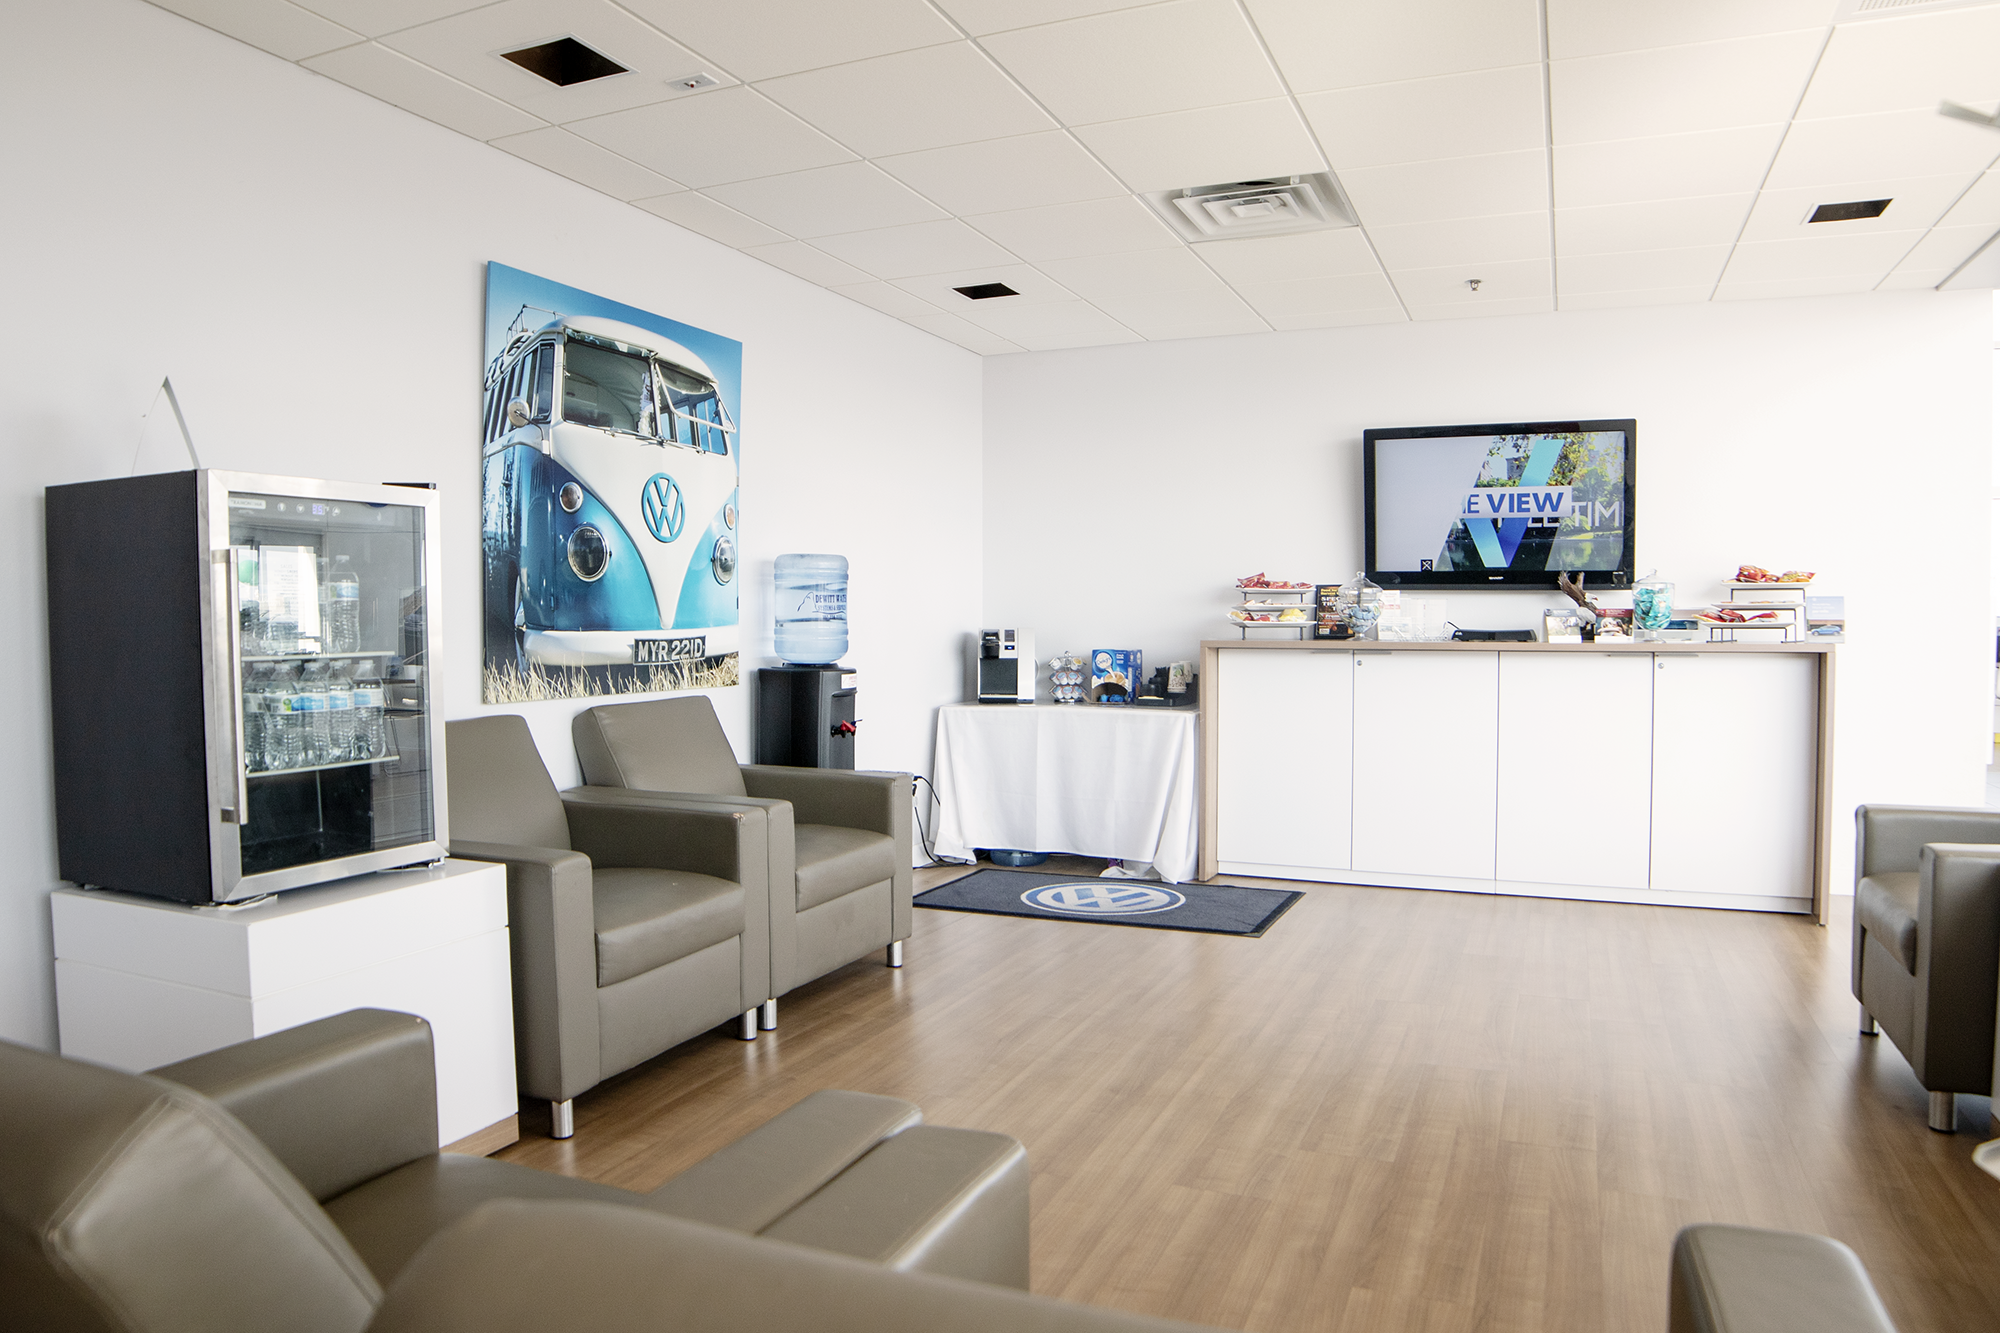 Showroom waiting area with seats and TV